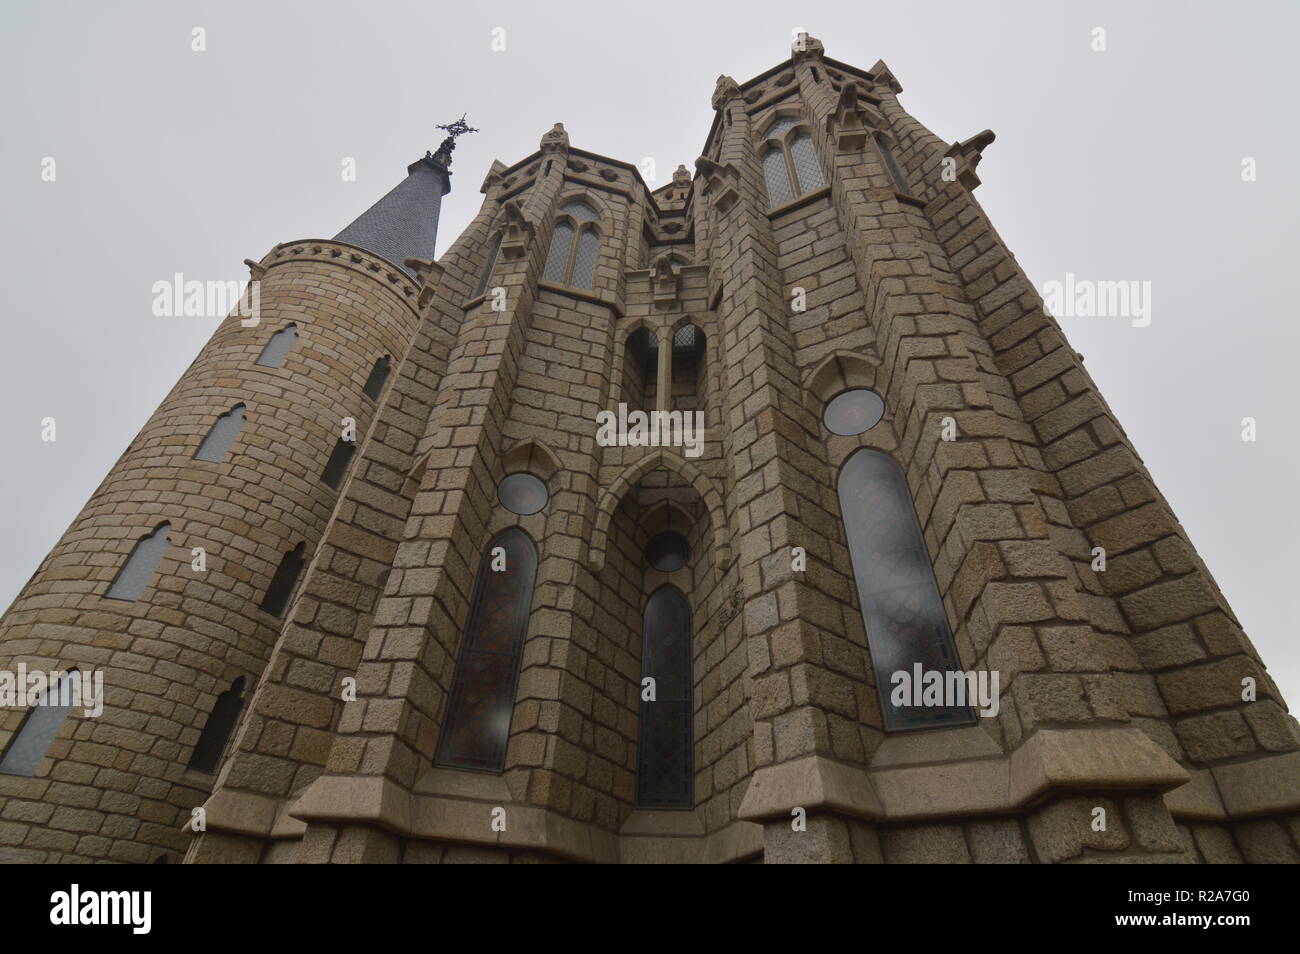 External Towers With Precious Stained Glass Of The Episcopal Palace In Astorga. Architecture, History, Camino De Santiago, Travel, Street Photography. Stock Photo